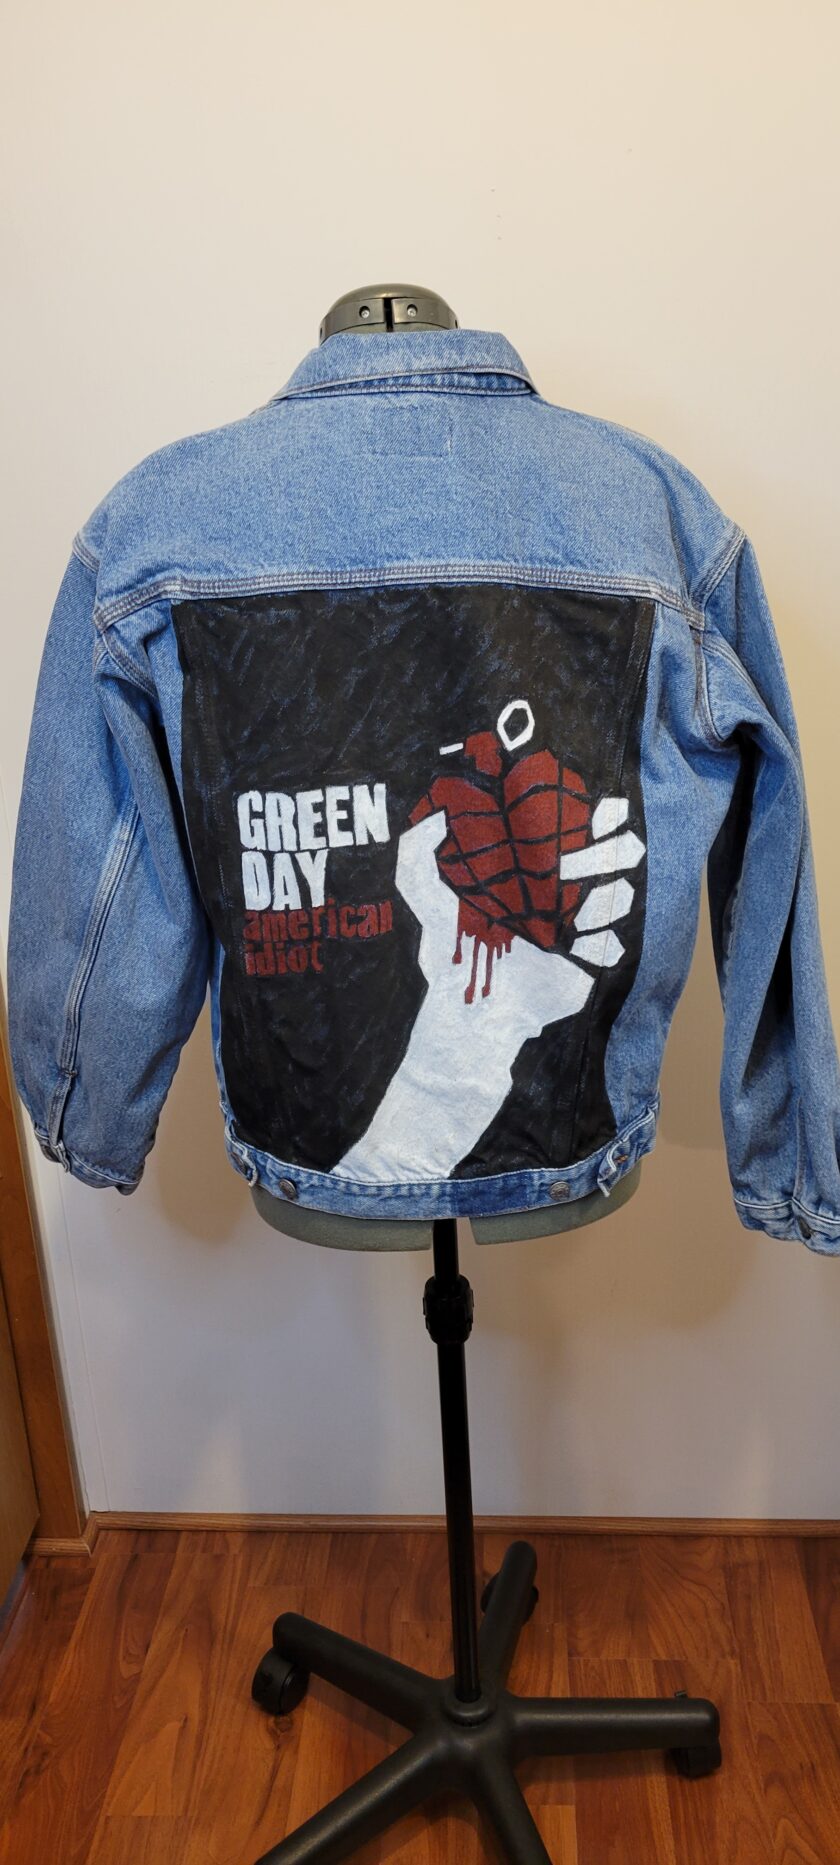 A denim jacket with a hand drawn heart on it.